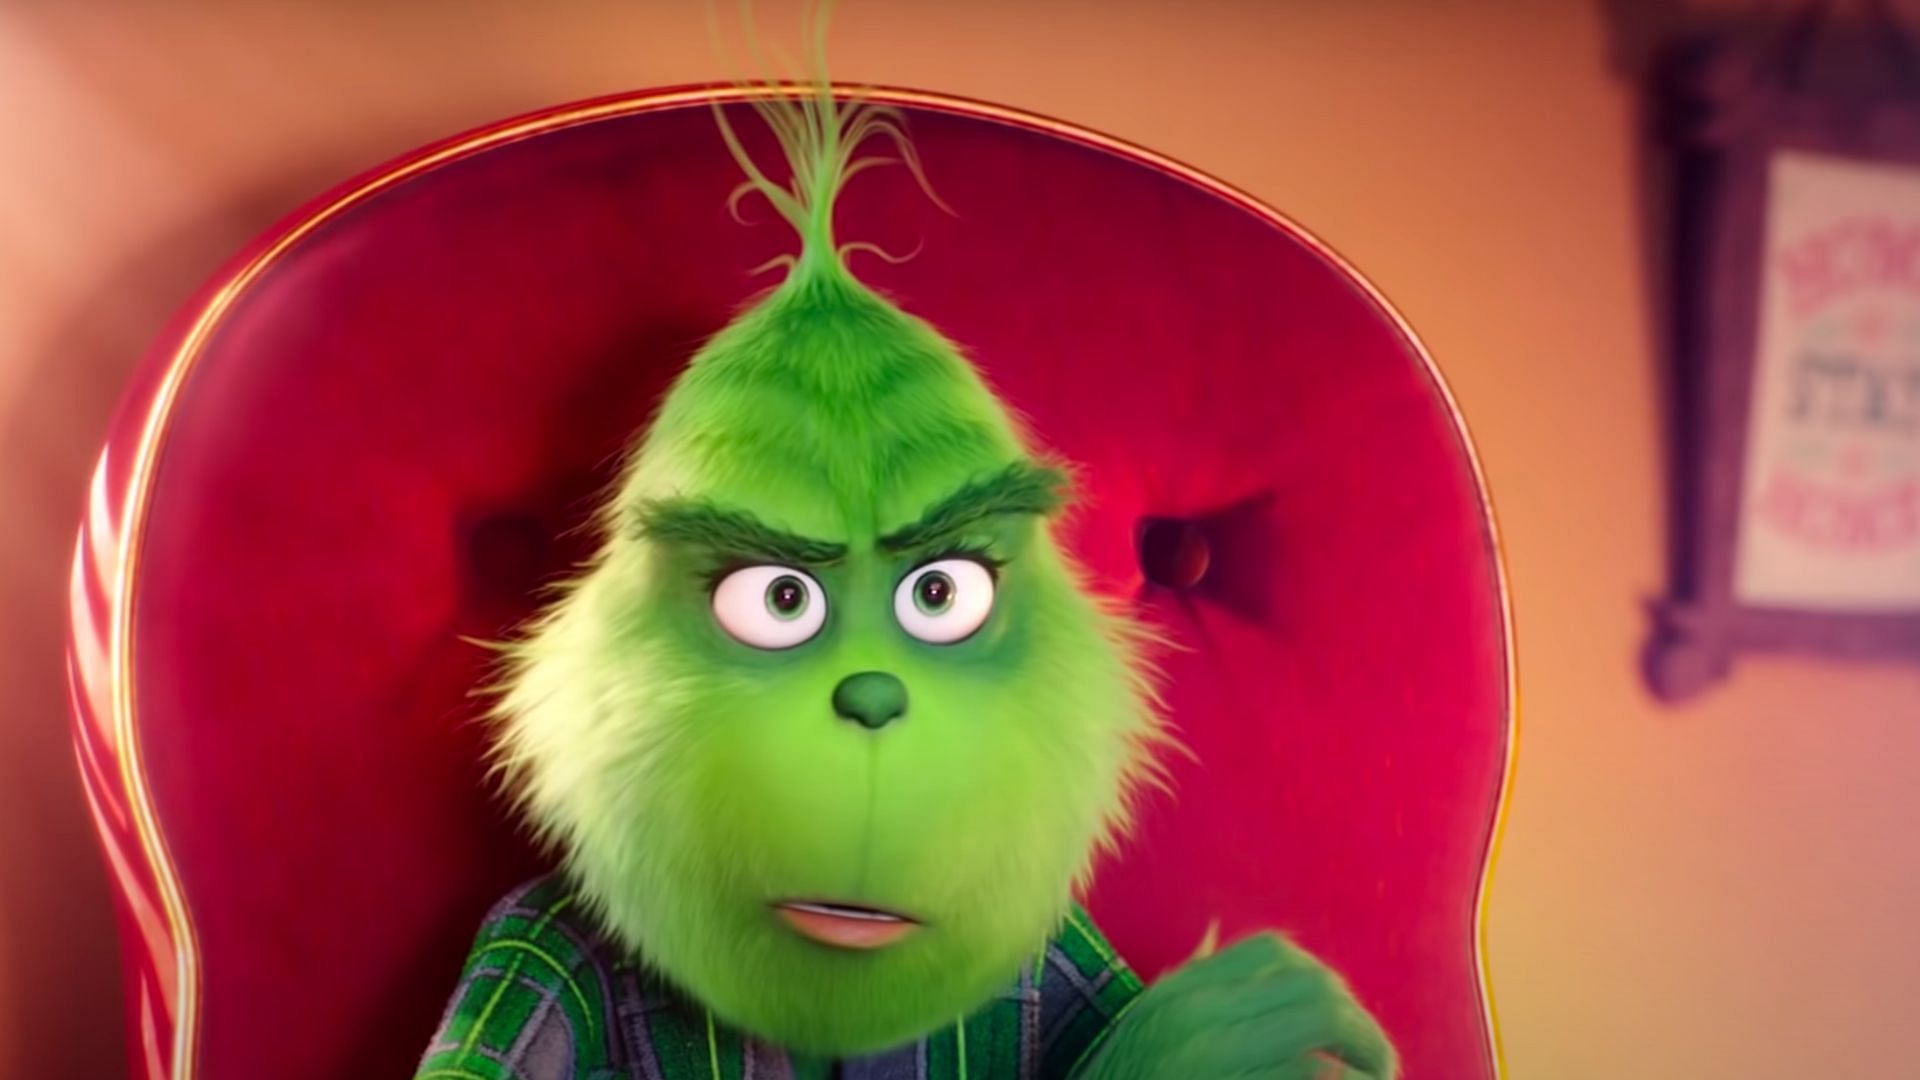 The Grinch was released in 2018 (Image via Universal Pictures)